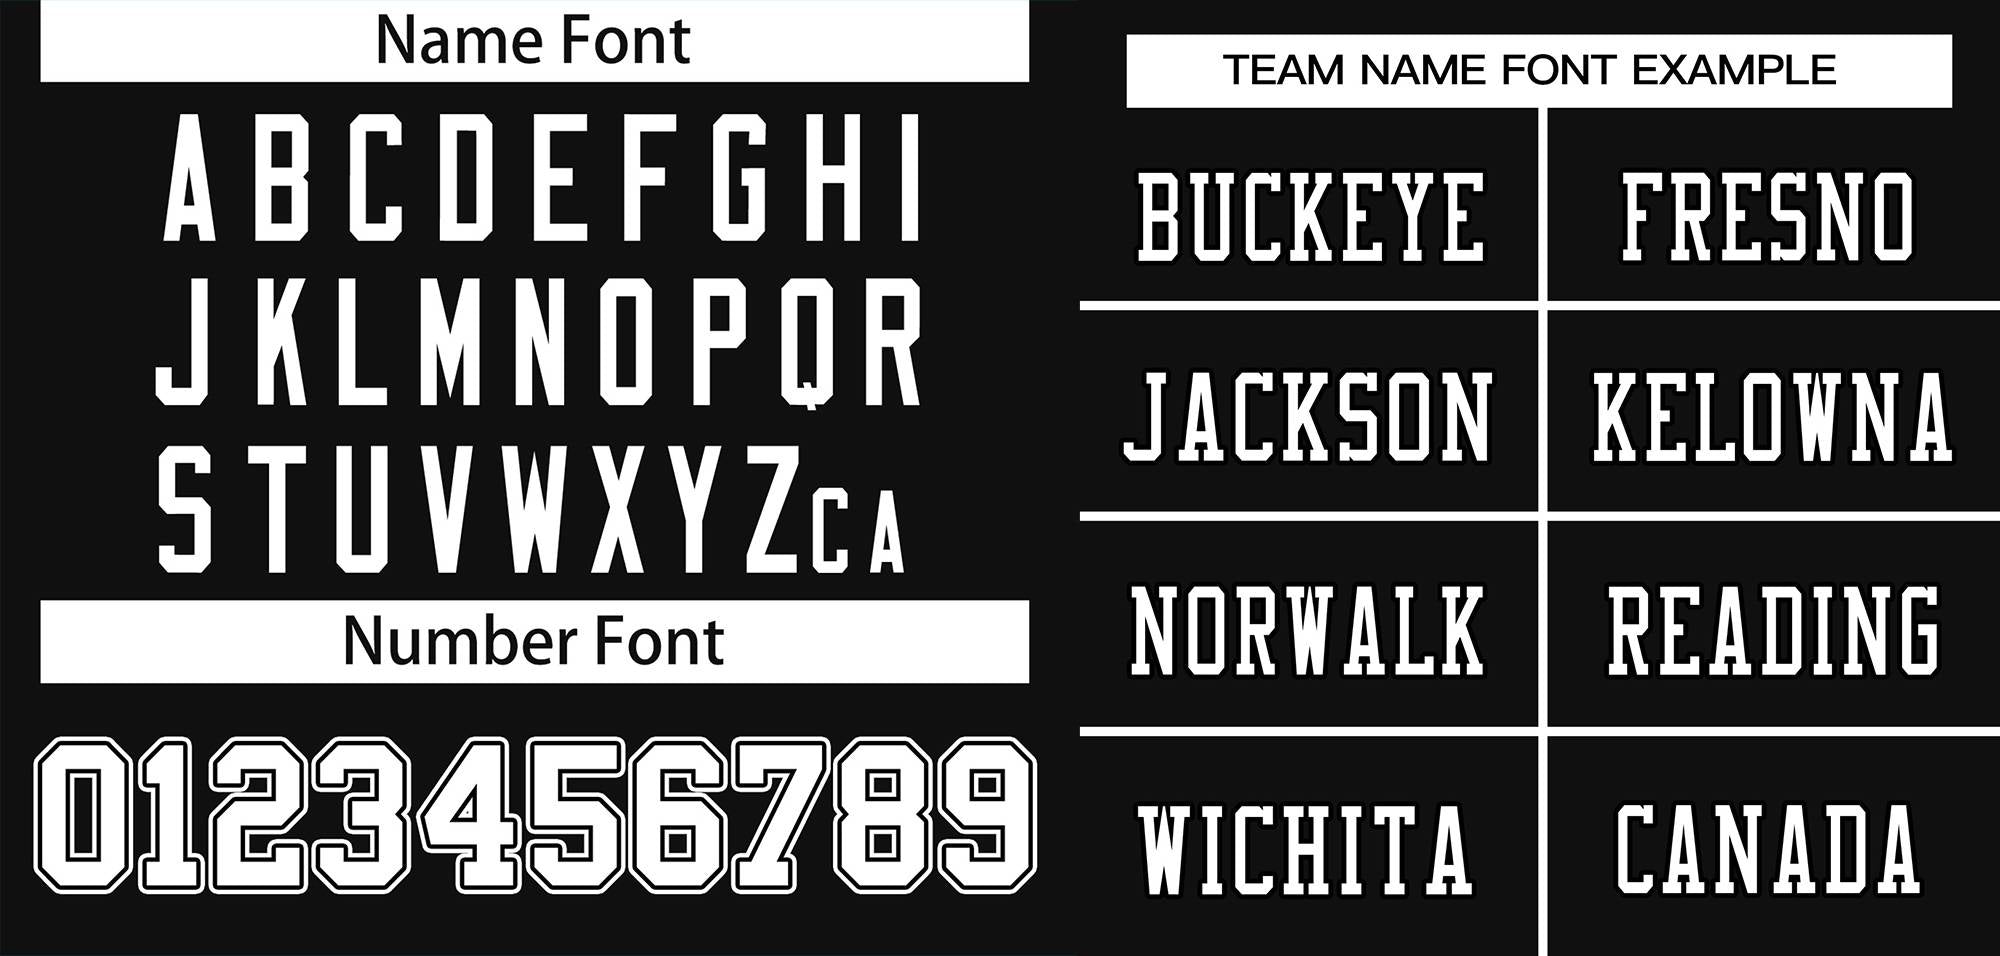 custom black football jersey team name and number font example